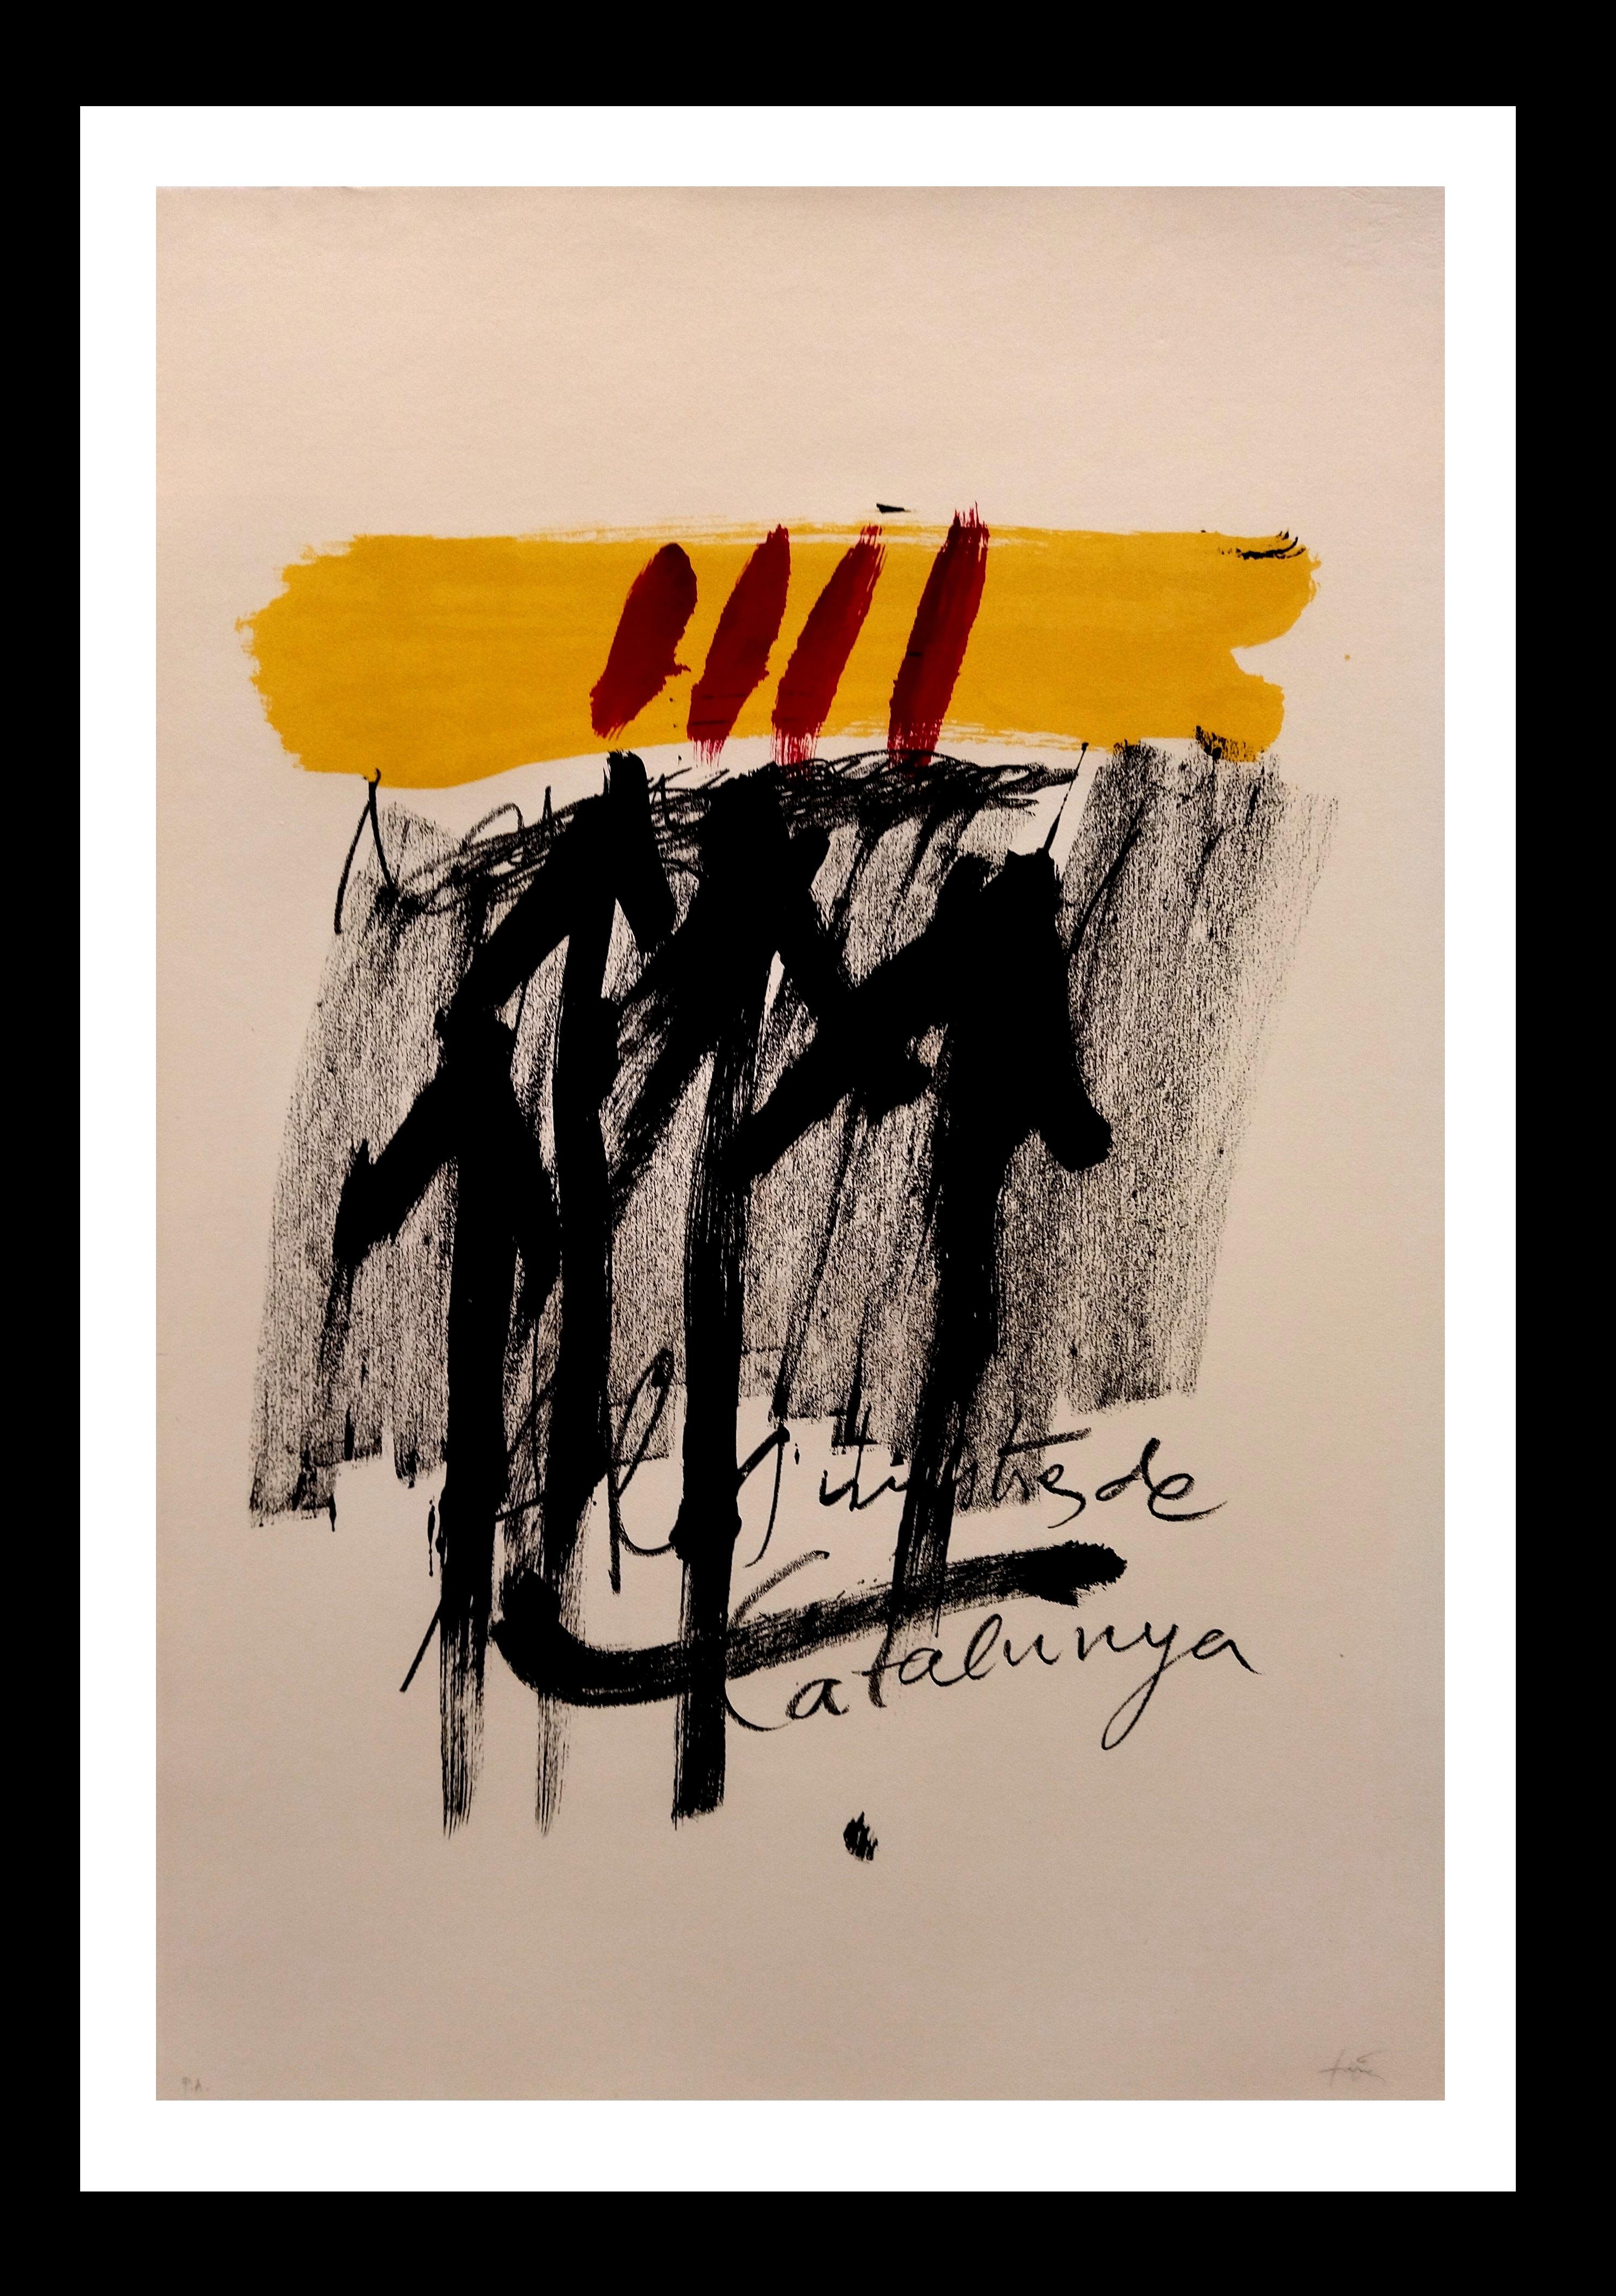  Tapies 114 Black  Red  Yellow  Vertical  original lithograph painting